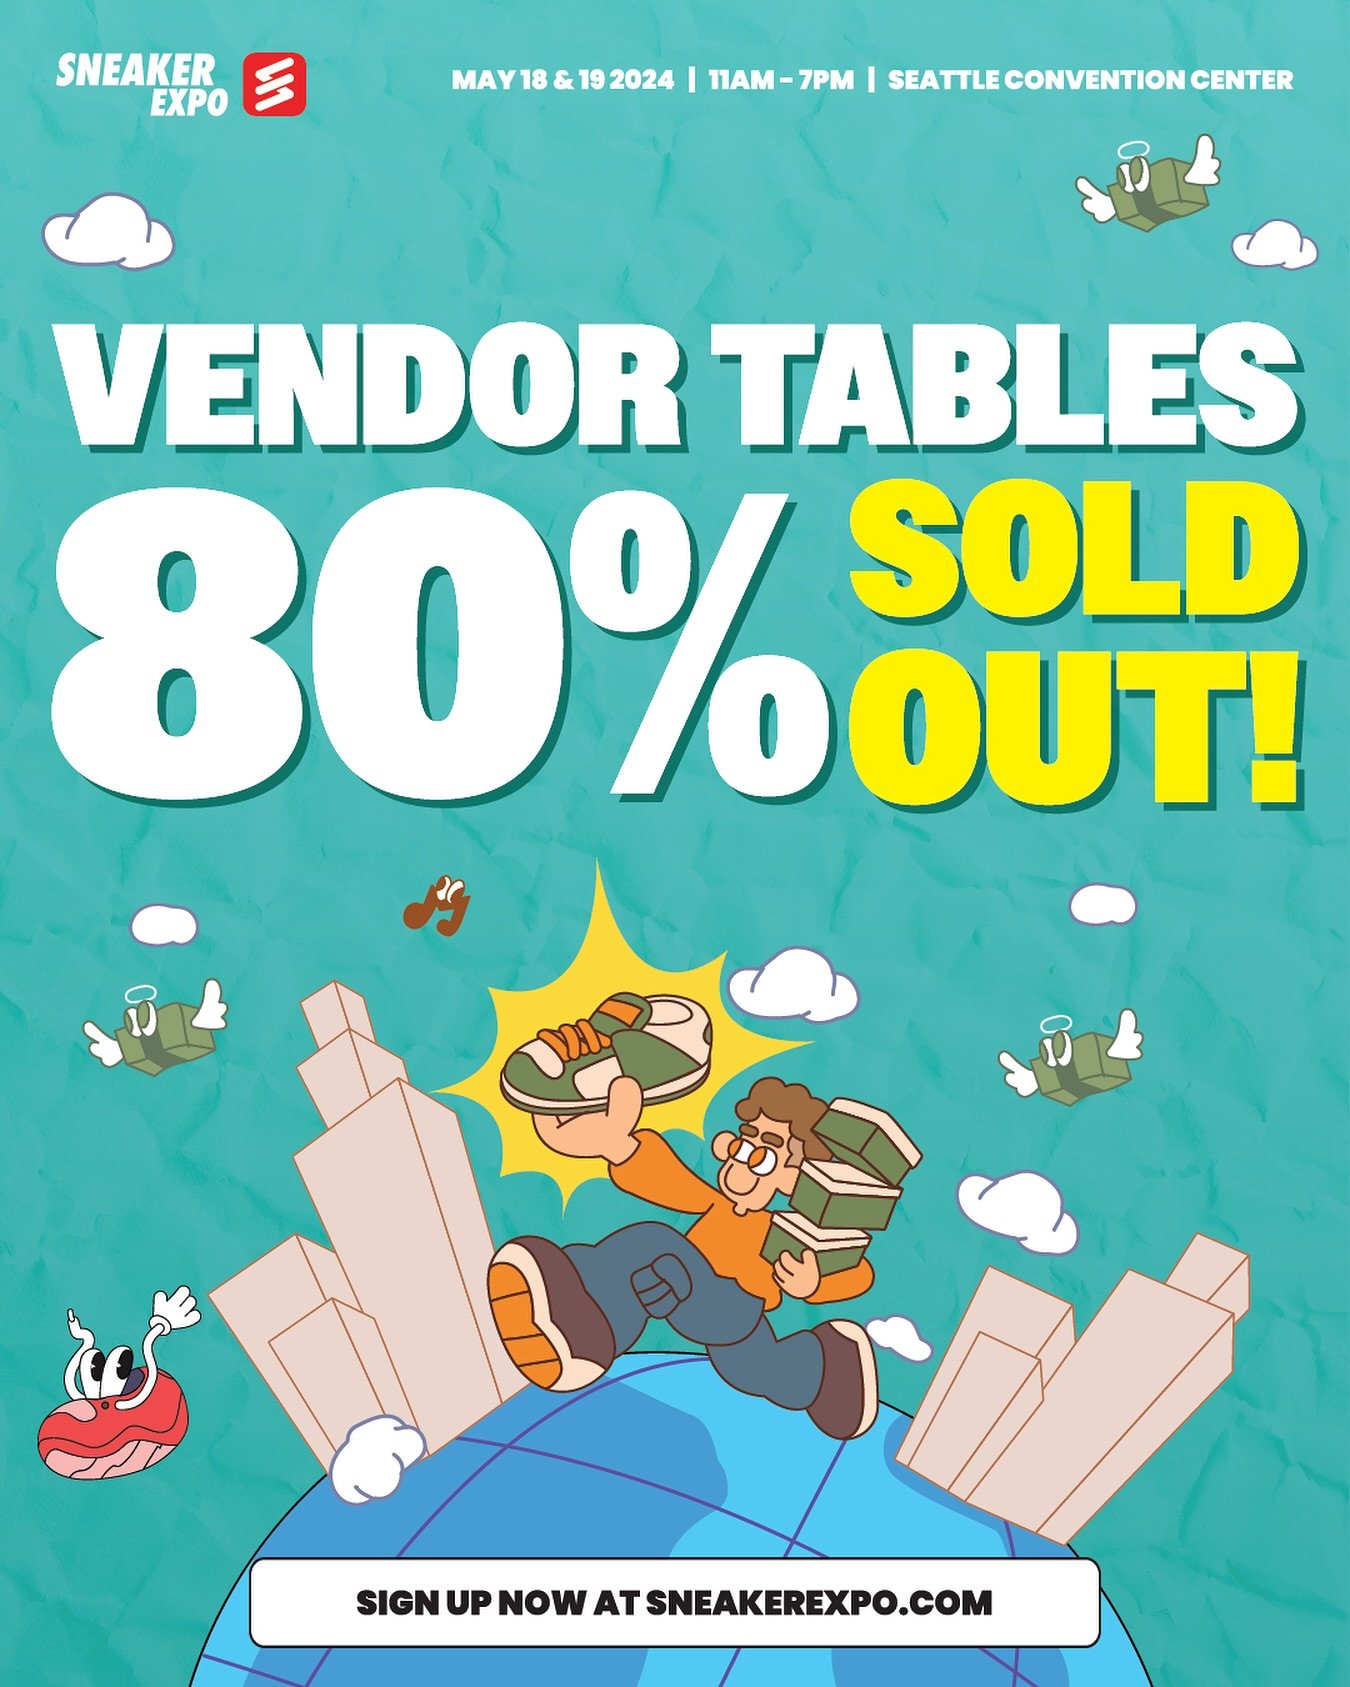 ‼️VENDORS LOCK IN‼️
Get your tables now before they are sold out!
Sneaker expo Seattle is going to be a movie! 🎥 🍿 

🐙 Seattle | May 18 &amp; 19
📍 Seattle Convention Center 

Grab your vendor tables at Sneakerexpo.com

#sneakerexpo #seattle #seat